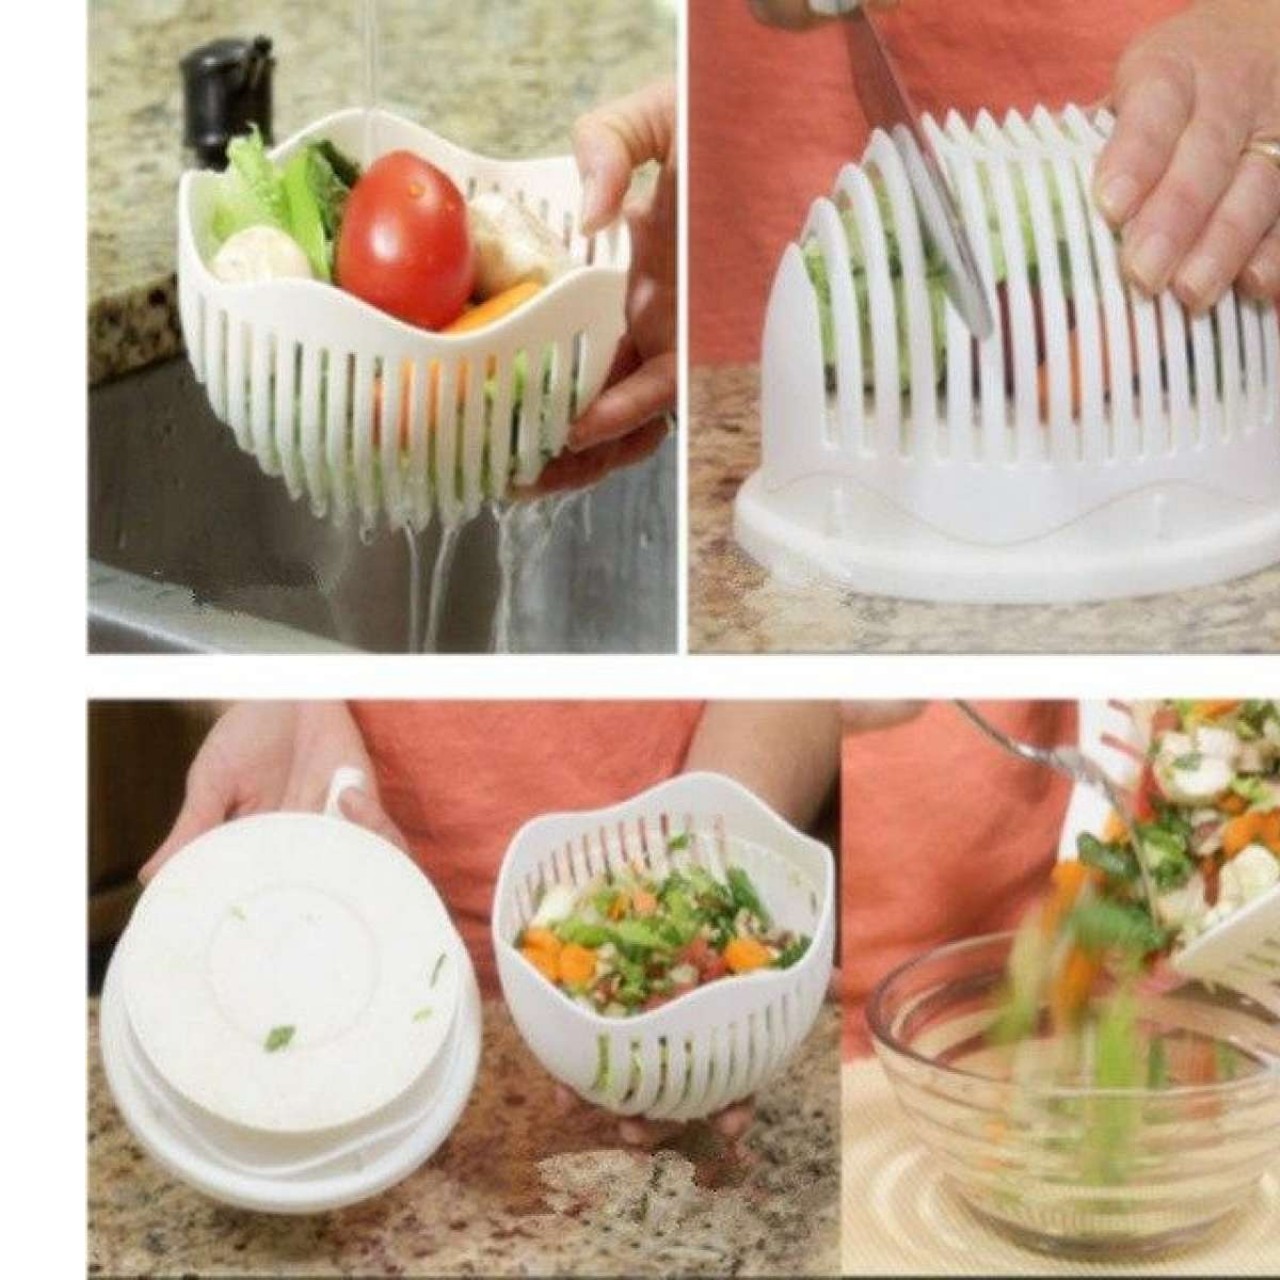 60 Second Salad Cutter Bowl Easy Salad Fruit Vegetable Washer And Cutter